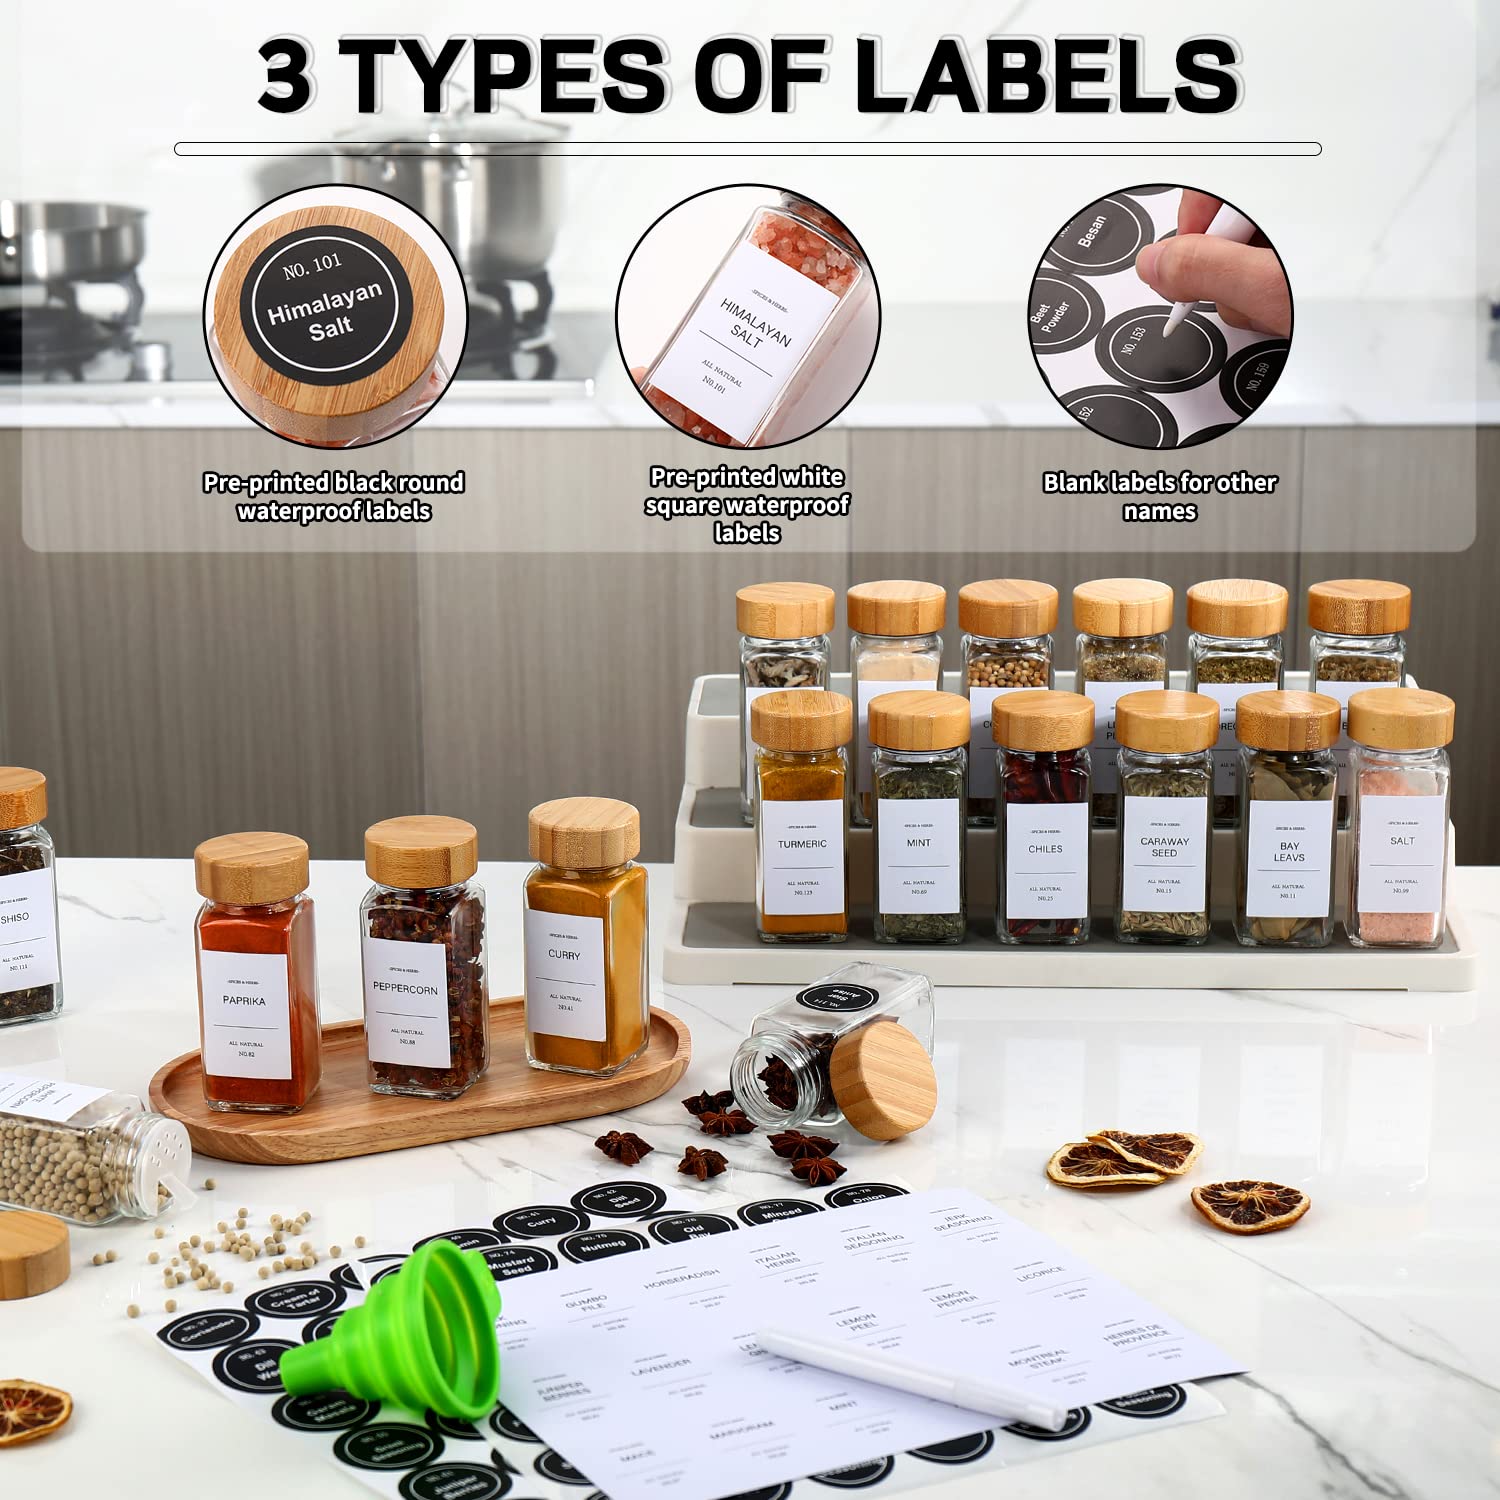 DIMBRAH Spice Jars with Label-4oz 24Pcs, Glass Spice Jars with Bamboo Lids,Spices Container Set with White Printed Spice Labels,Kitchen Empty Spice Jars with Shaker Lids